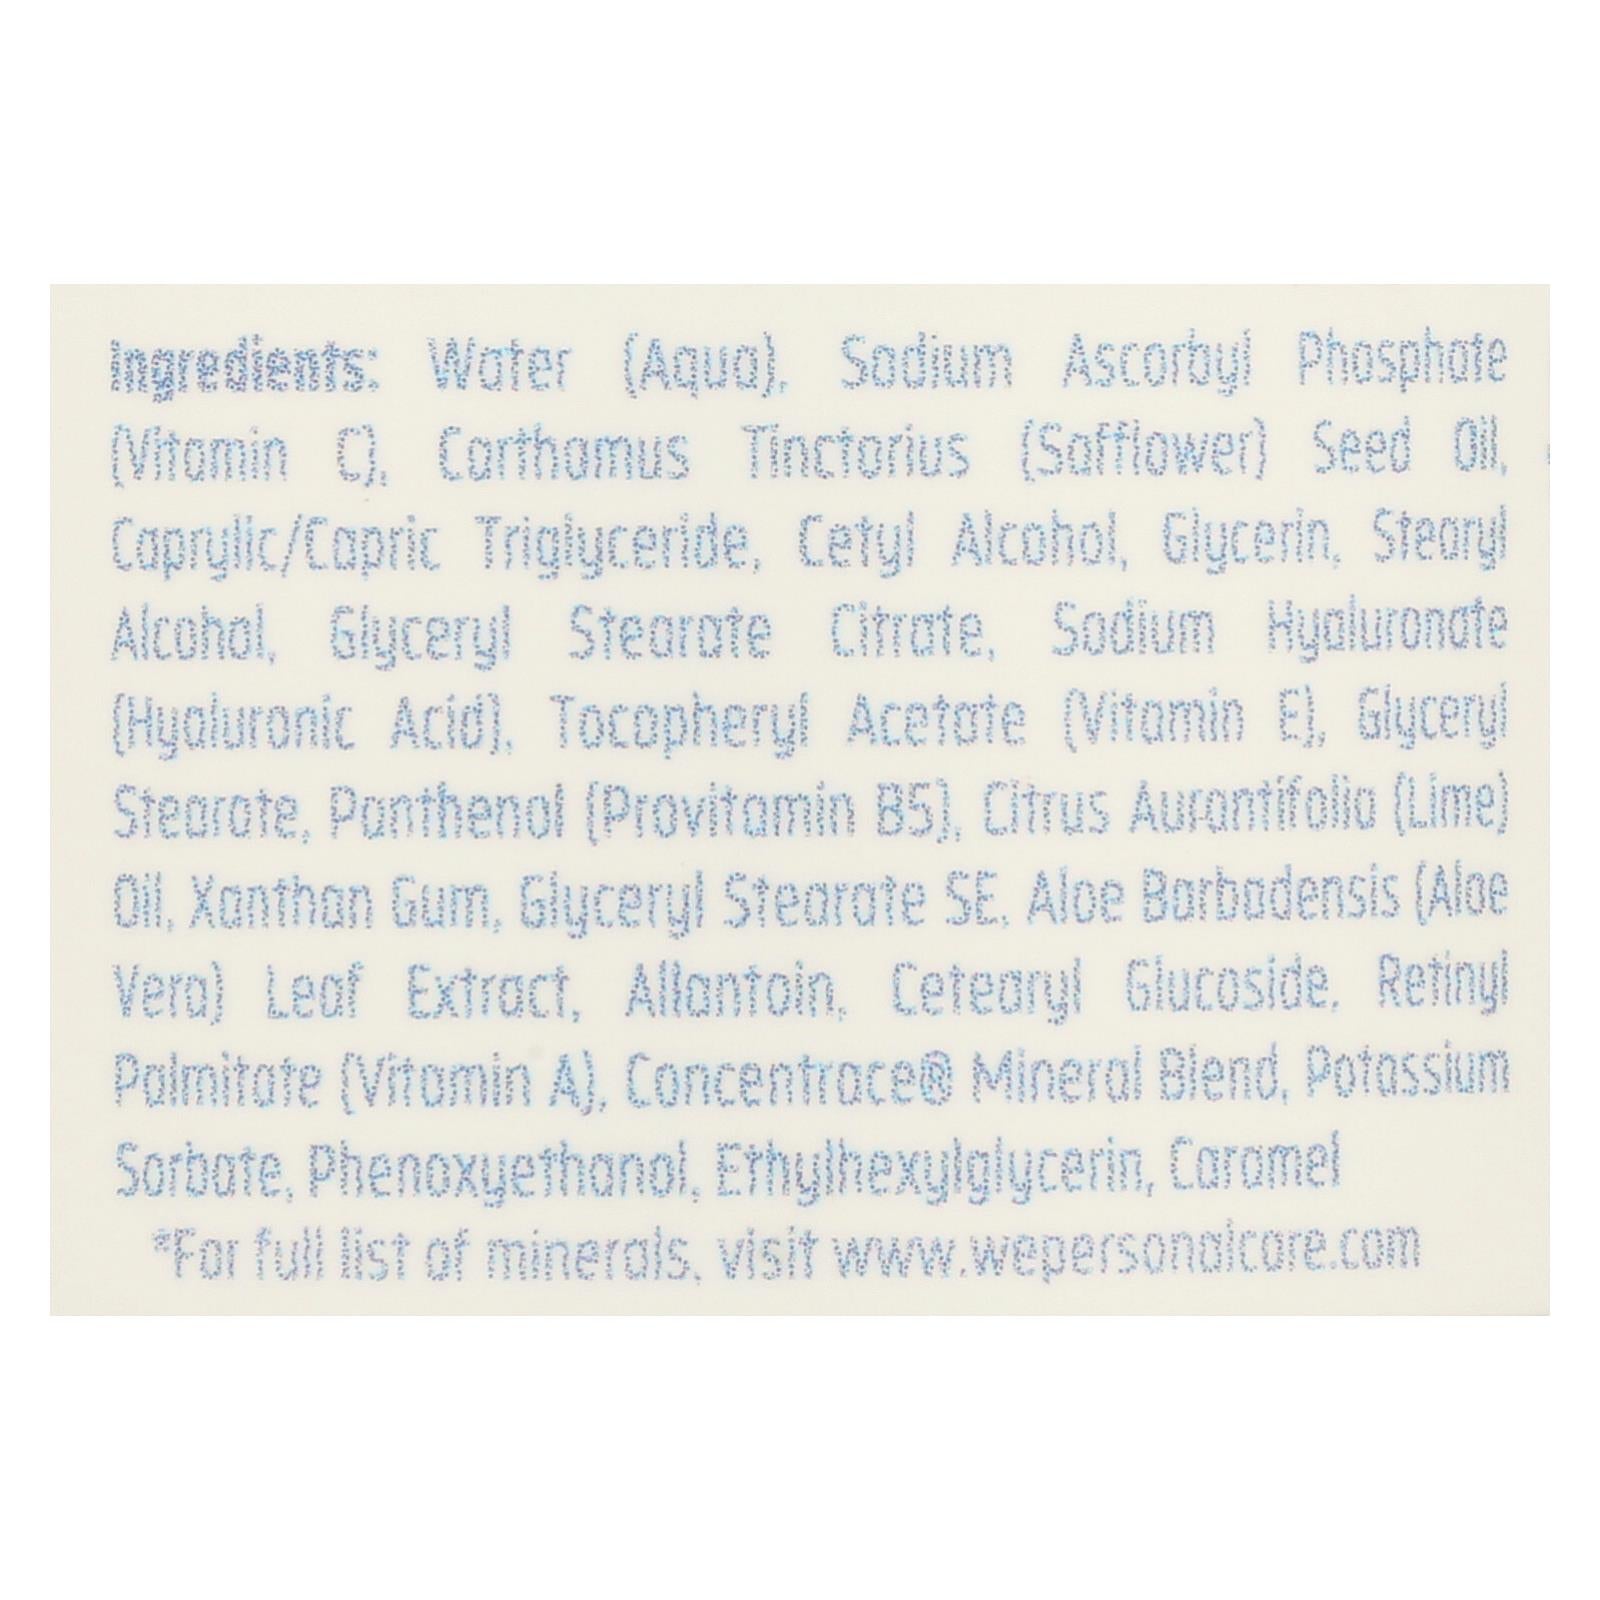 White Egret Vitamin C Hyaluronic Acid Serum With 72 Ionic Minerals Firms And  - 1 Each - 2 FZ